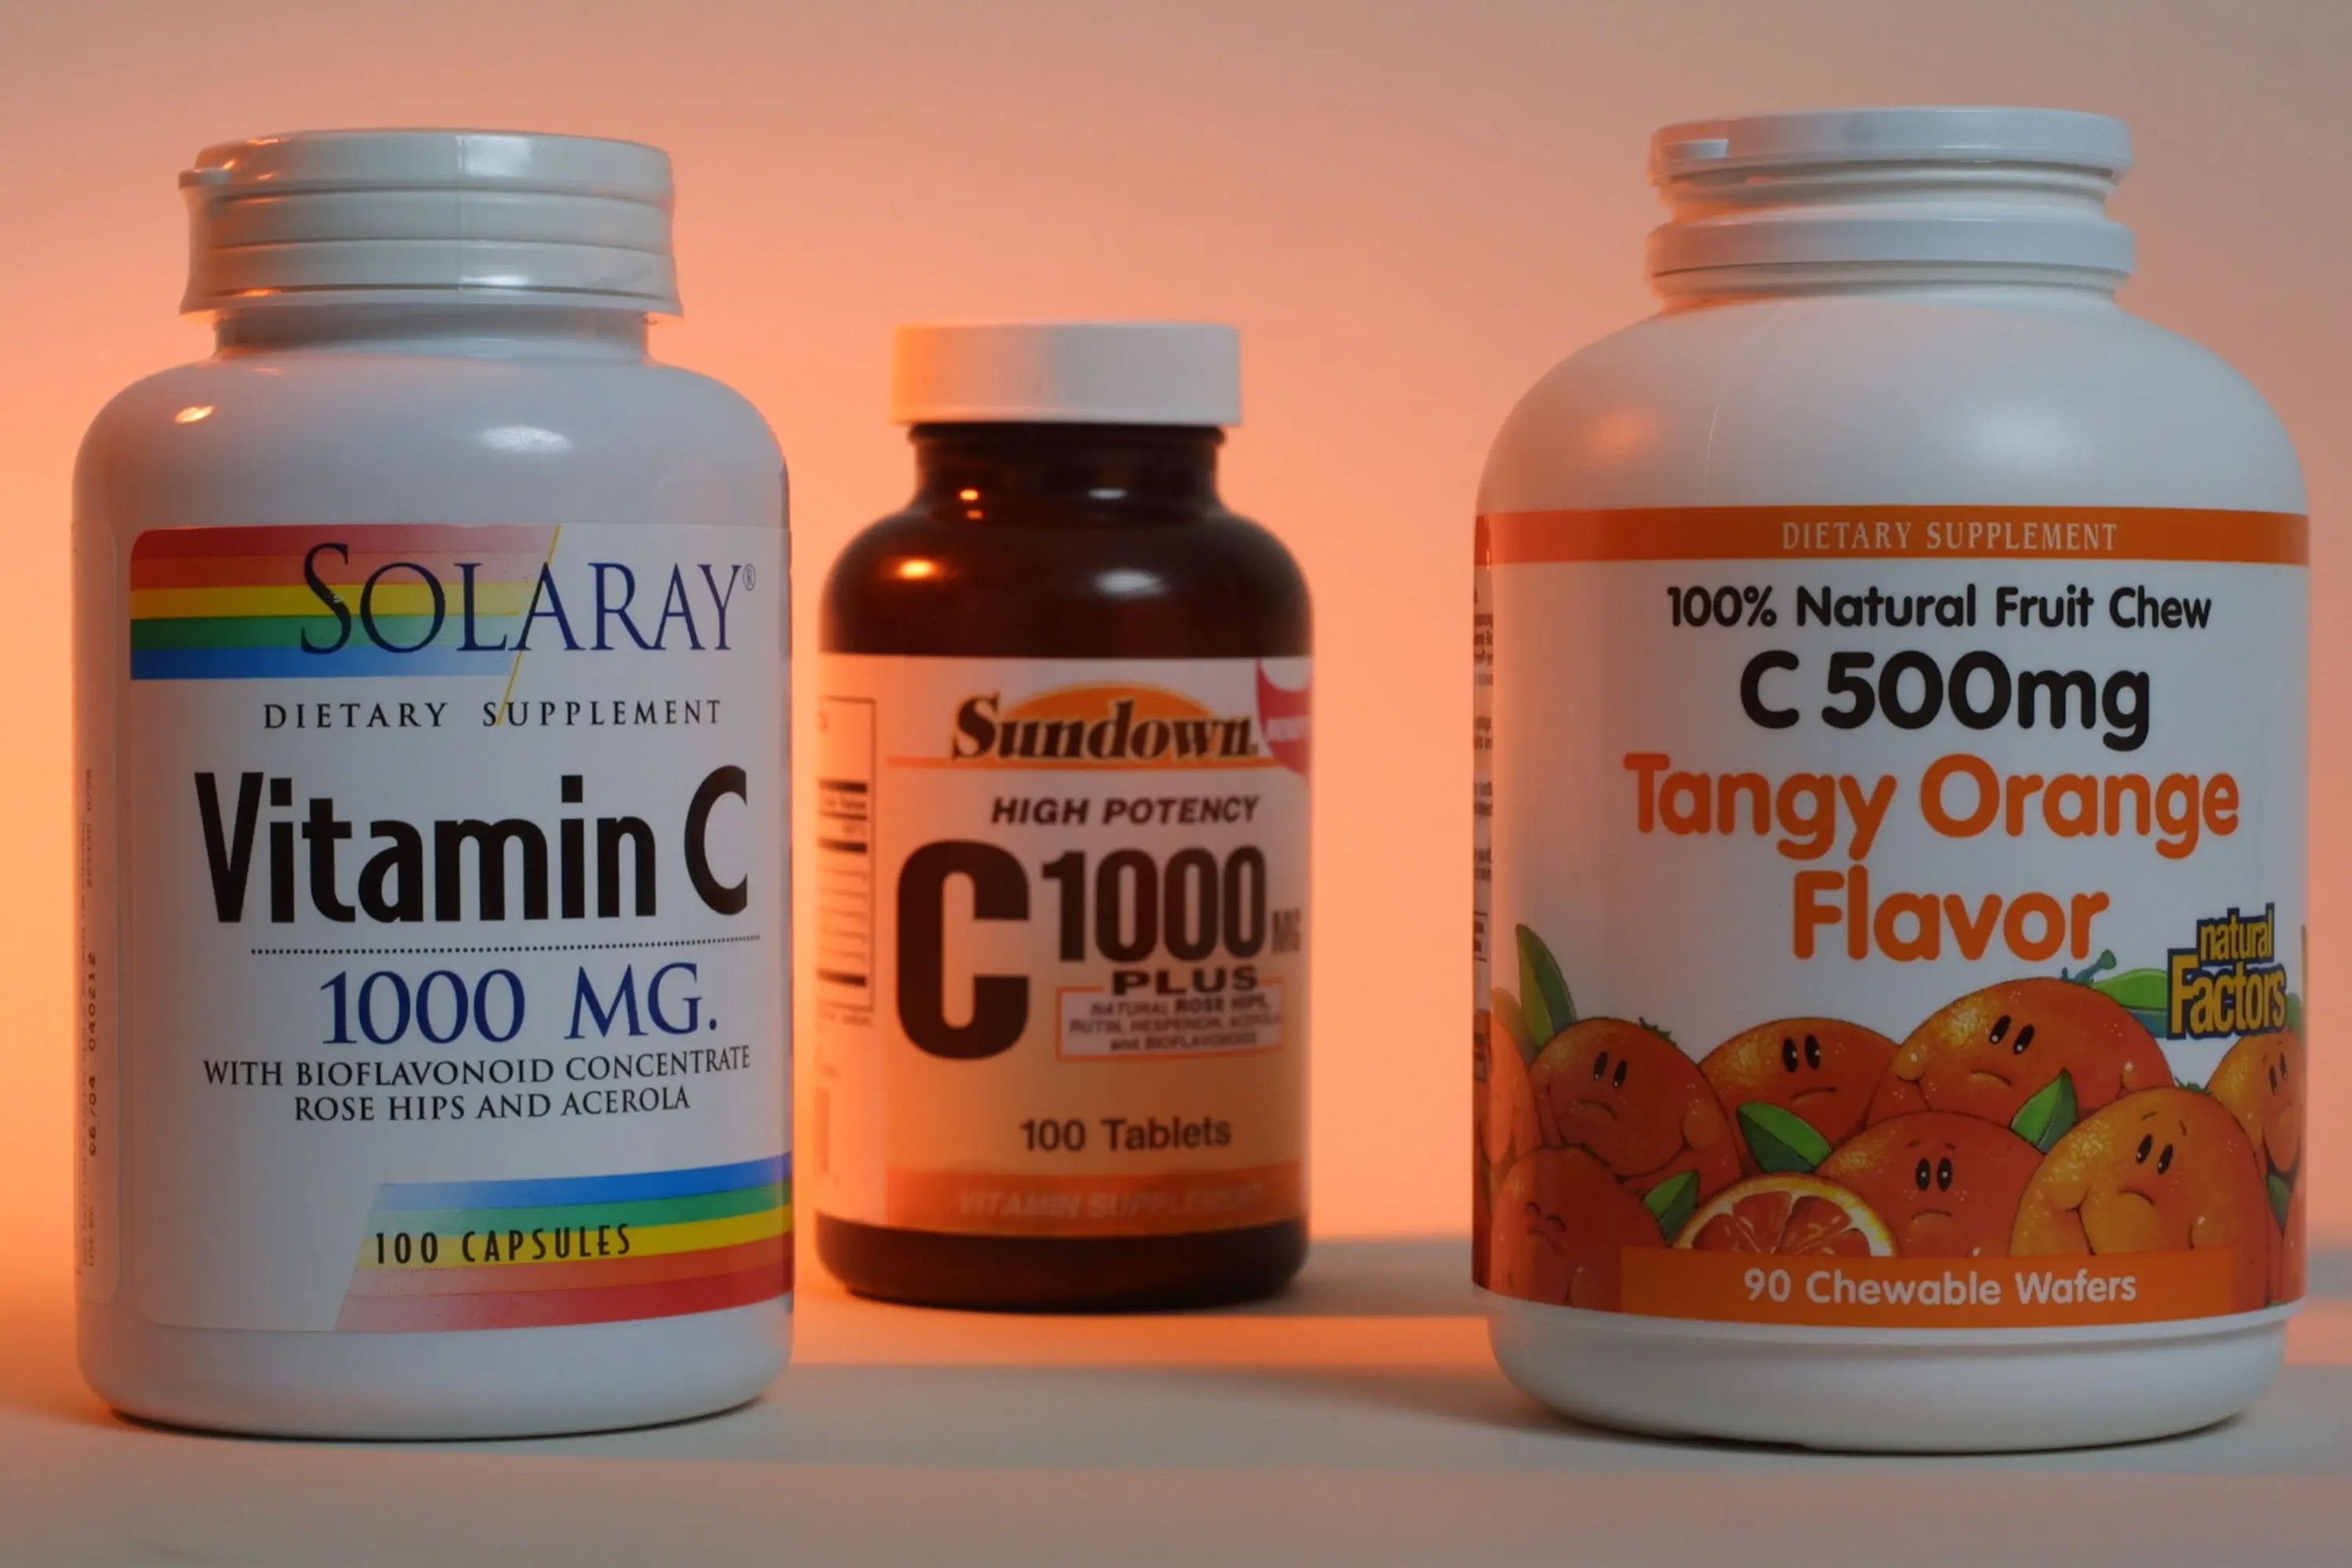 Vitamin C may help acidify urine and kill bacteria that cause urinary tract infections.